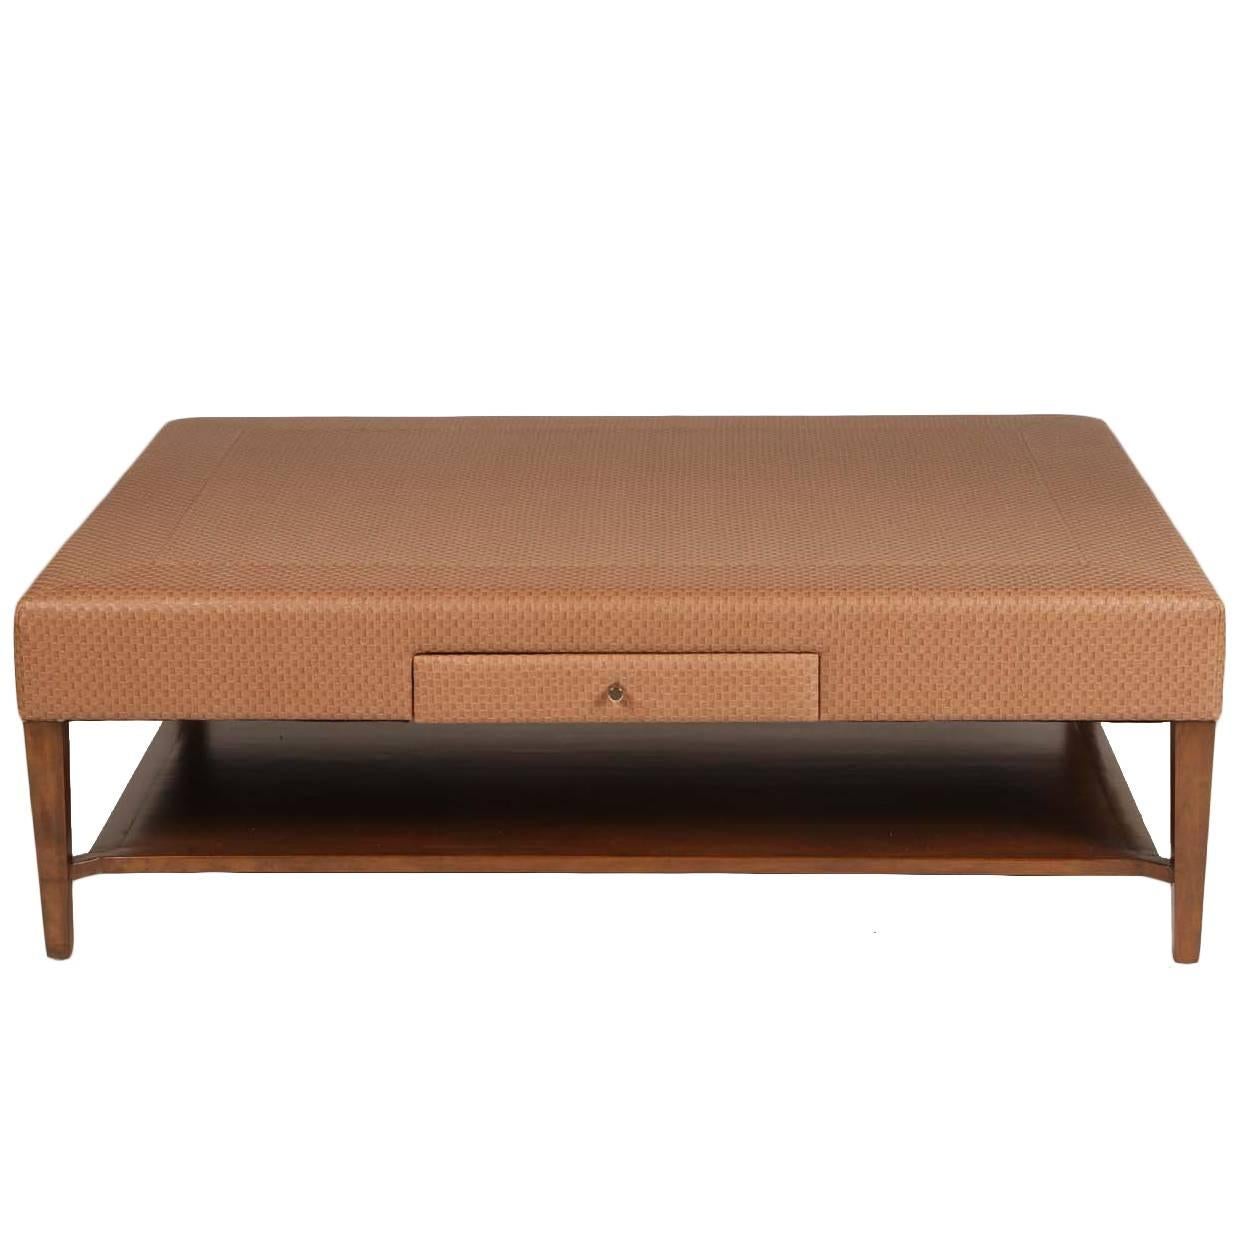 Large-Scale Upholstered Coffee Table